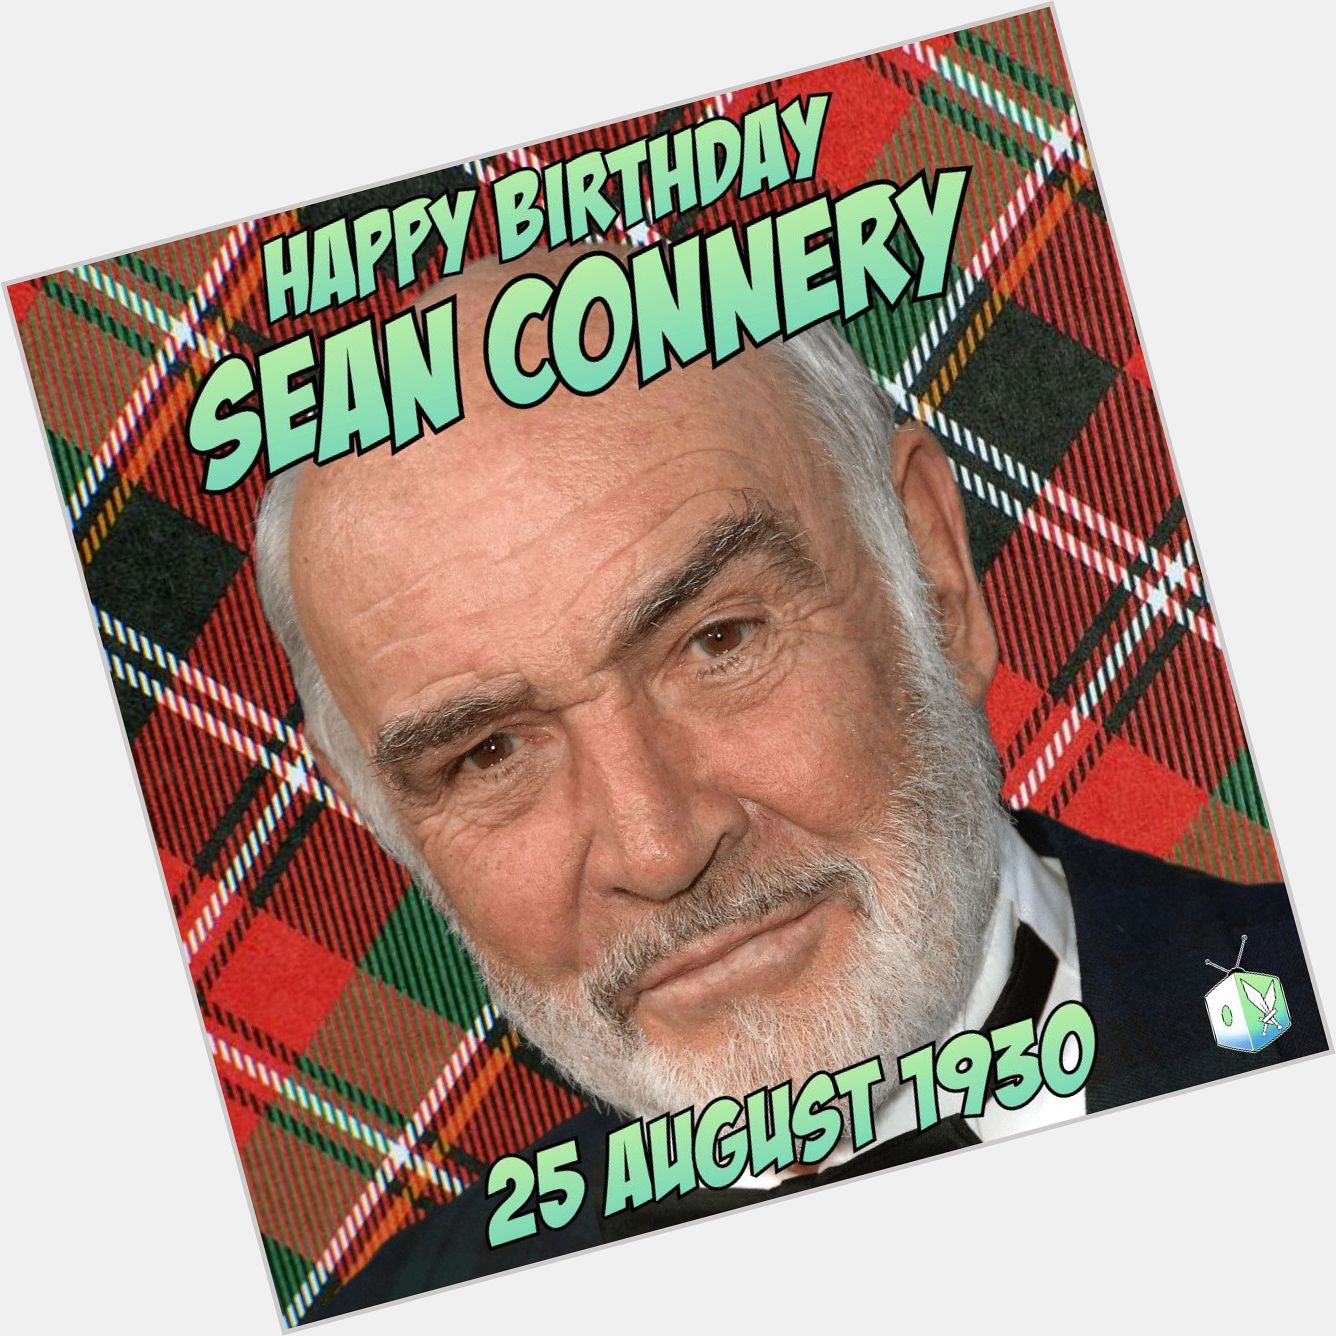 Happy Birthday to the legendary Sean Connery, the O.G. 007! 